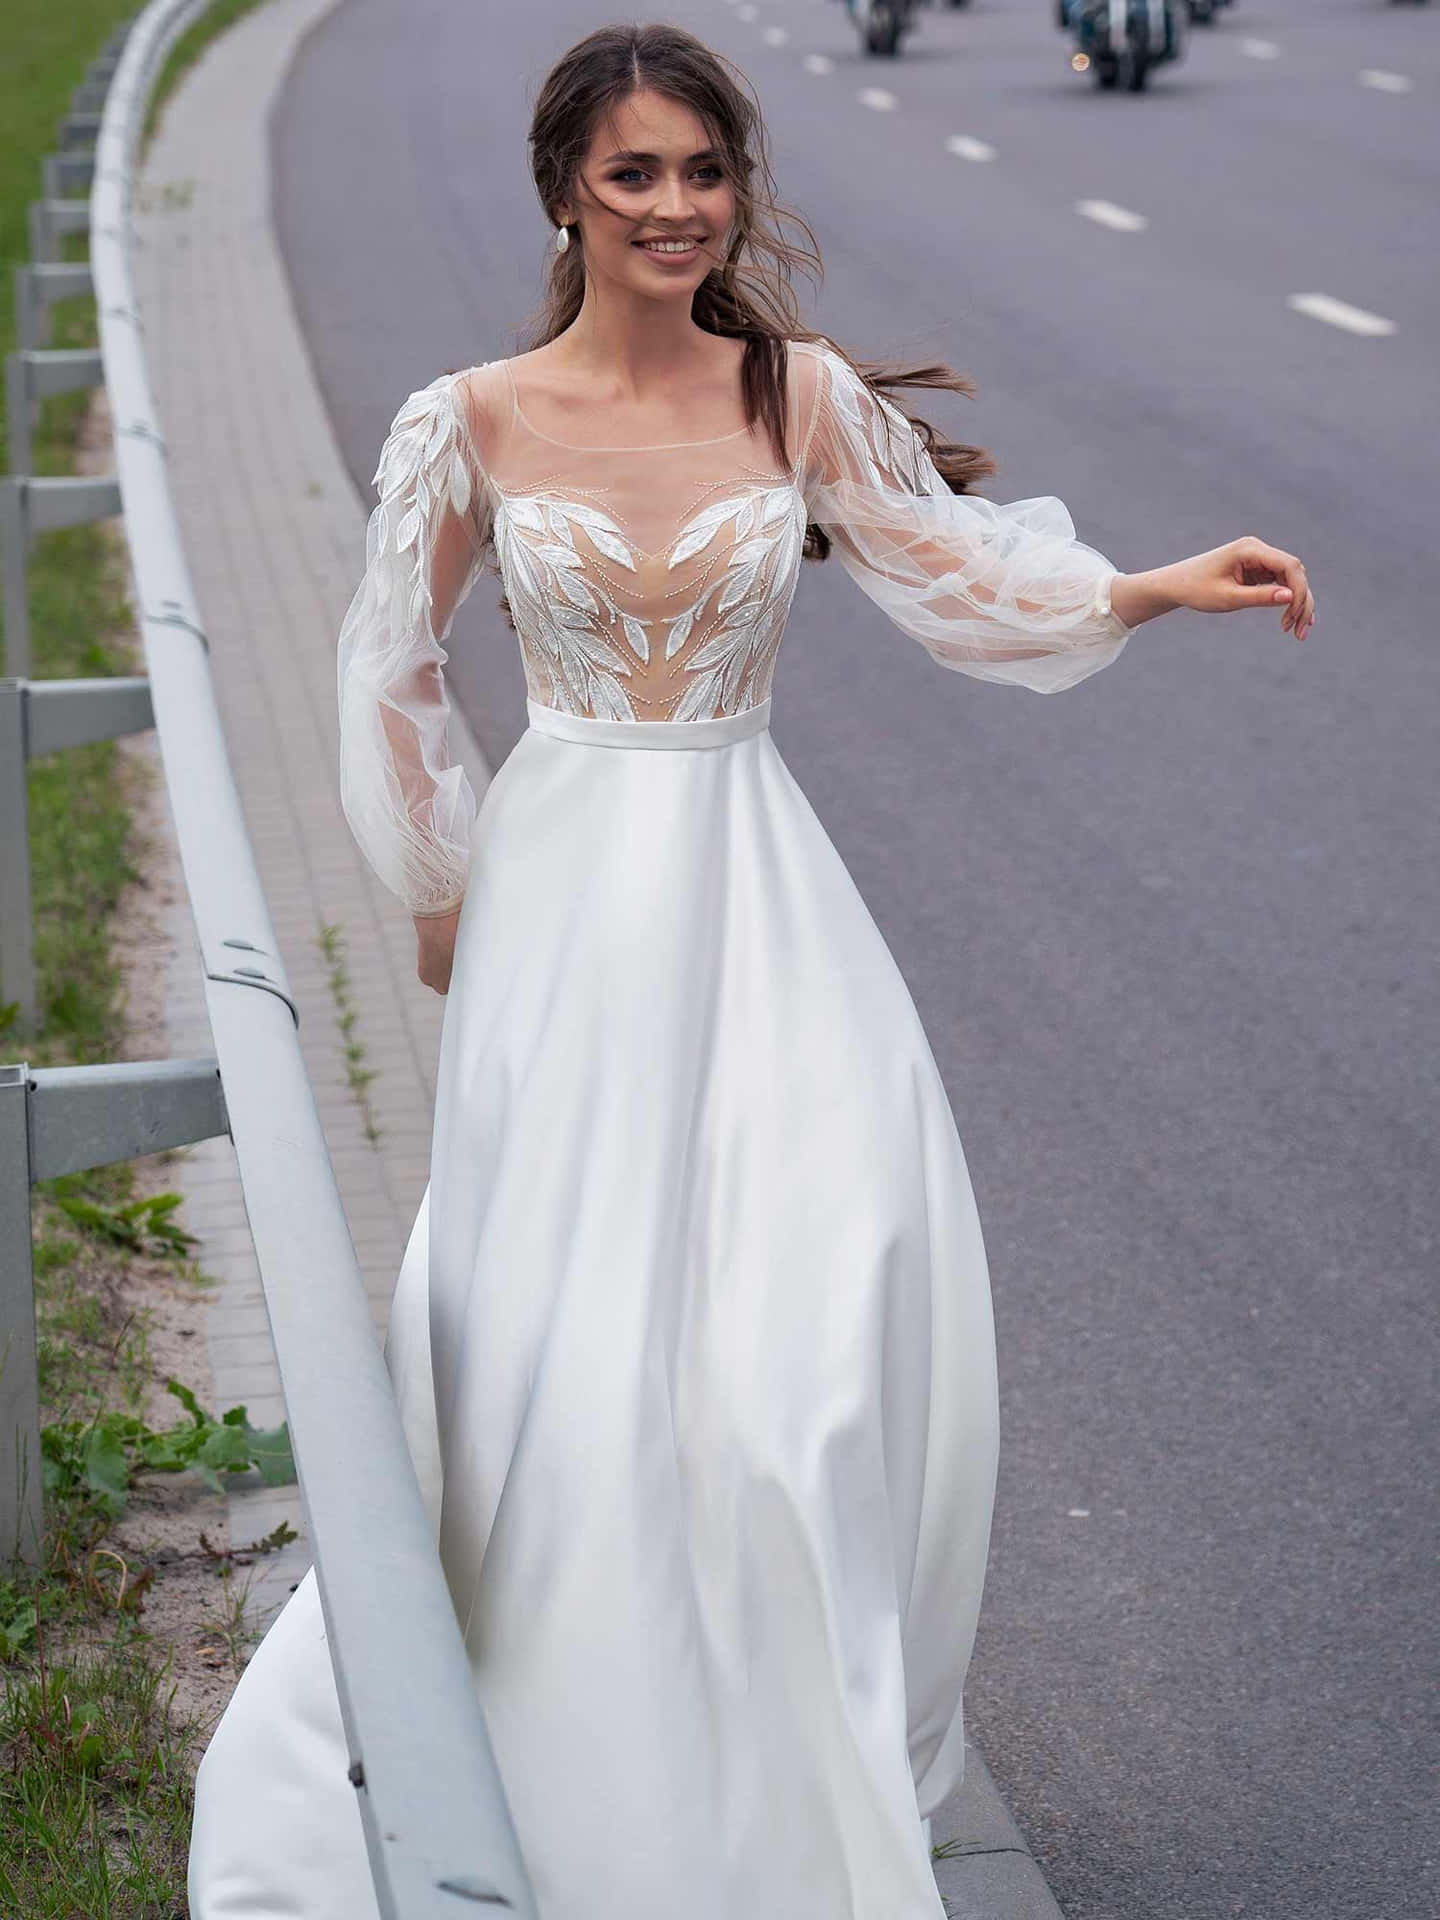 Download A Woman In A White Wedding Dress Is Walking Down The Road ...